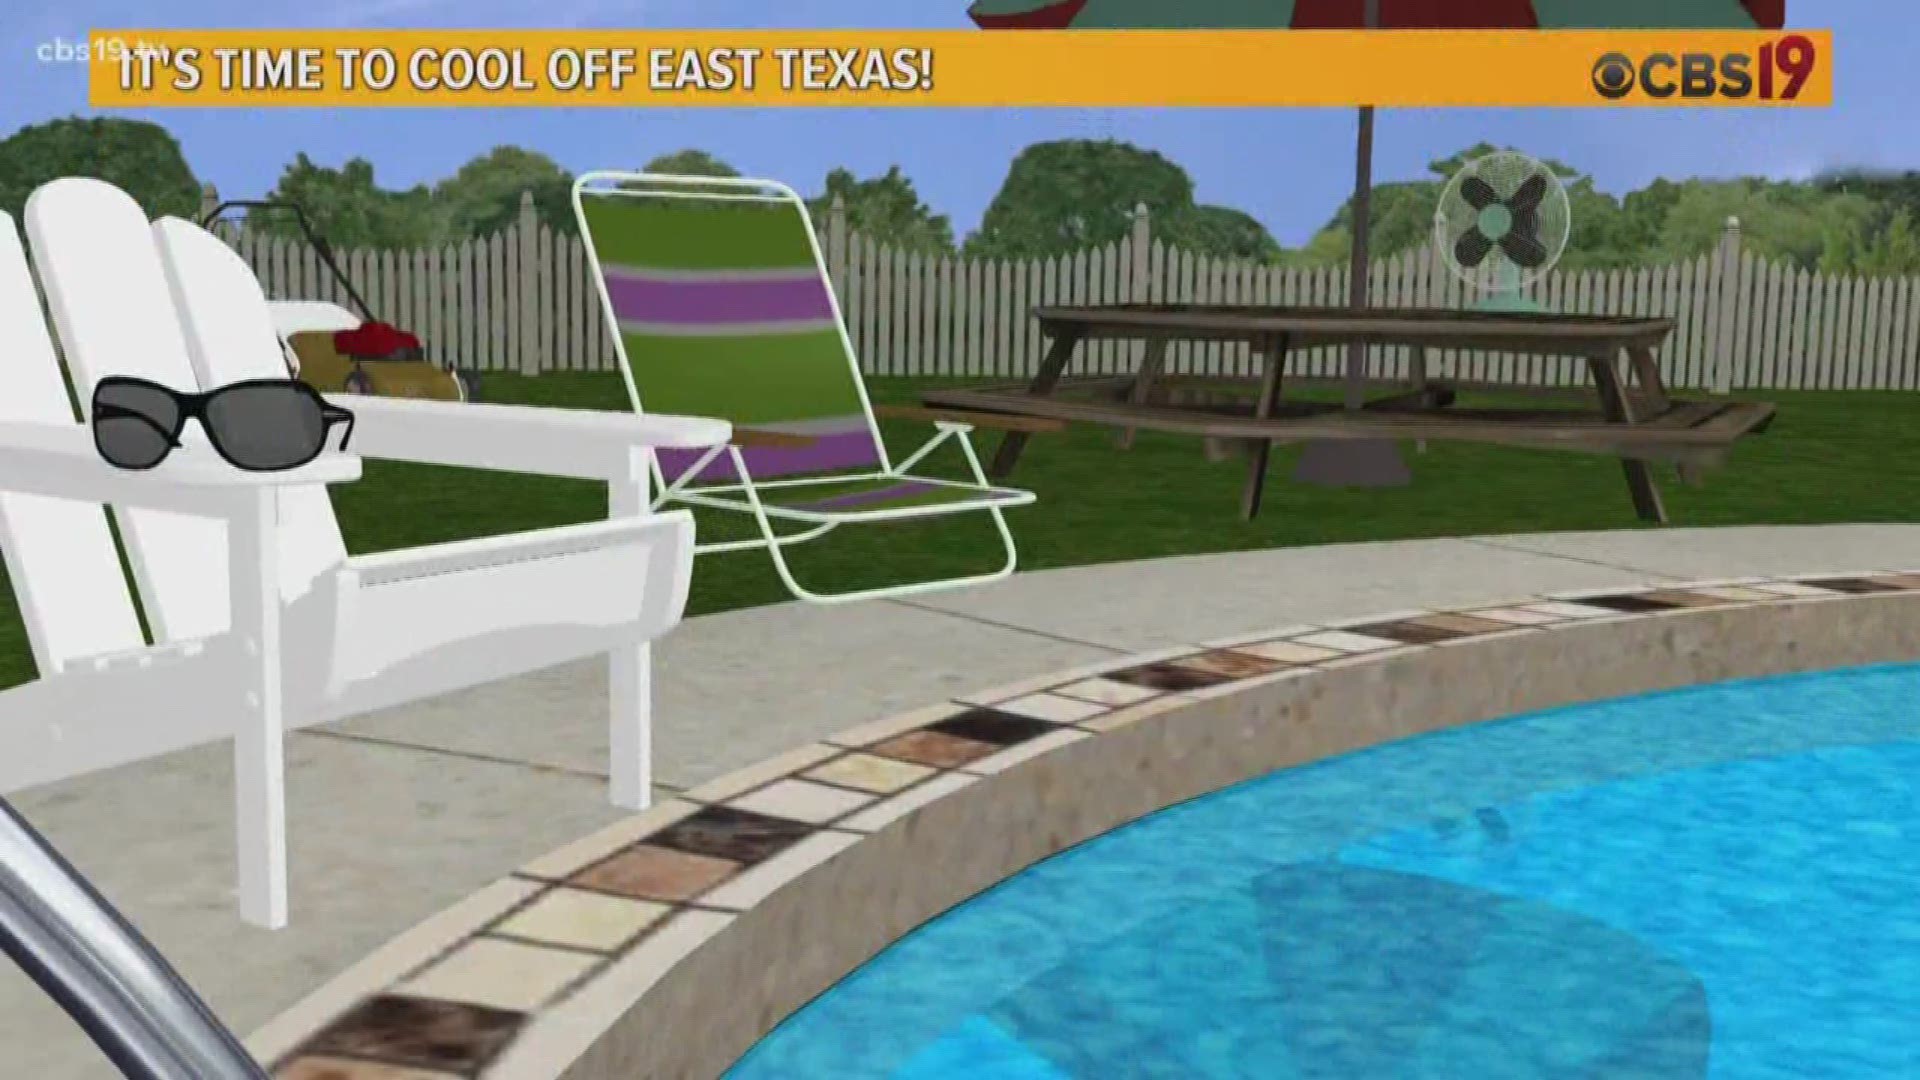 Meteorologist Michael Behrens has a look at where you can go to beat the heat and hit the pools starting this weekend in East Texas!!